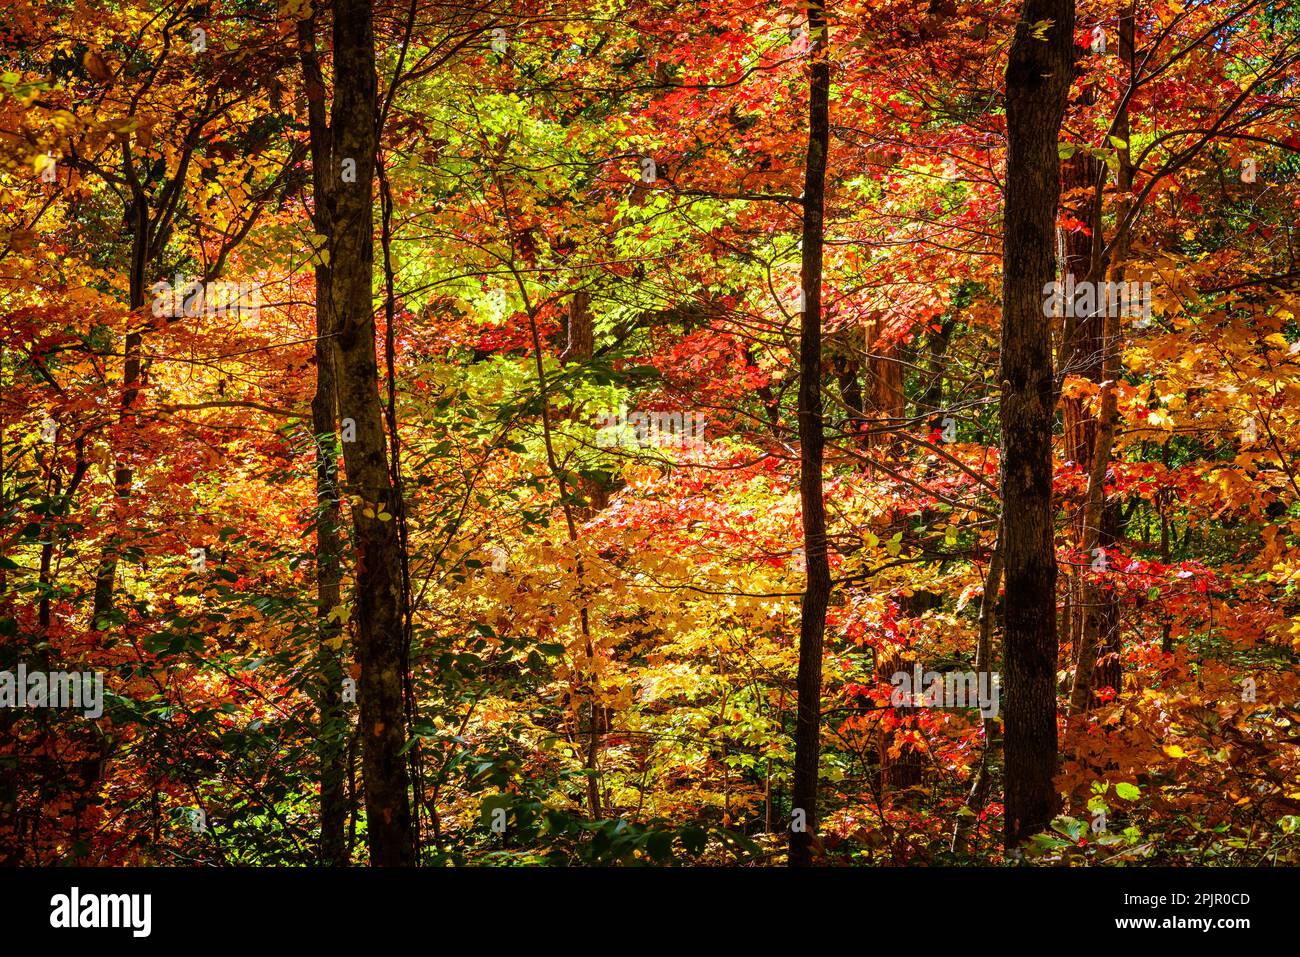 Fall colors in the forest near Asheville, North Carolina Stock Photo